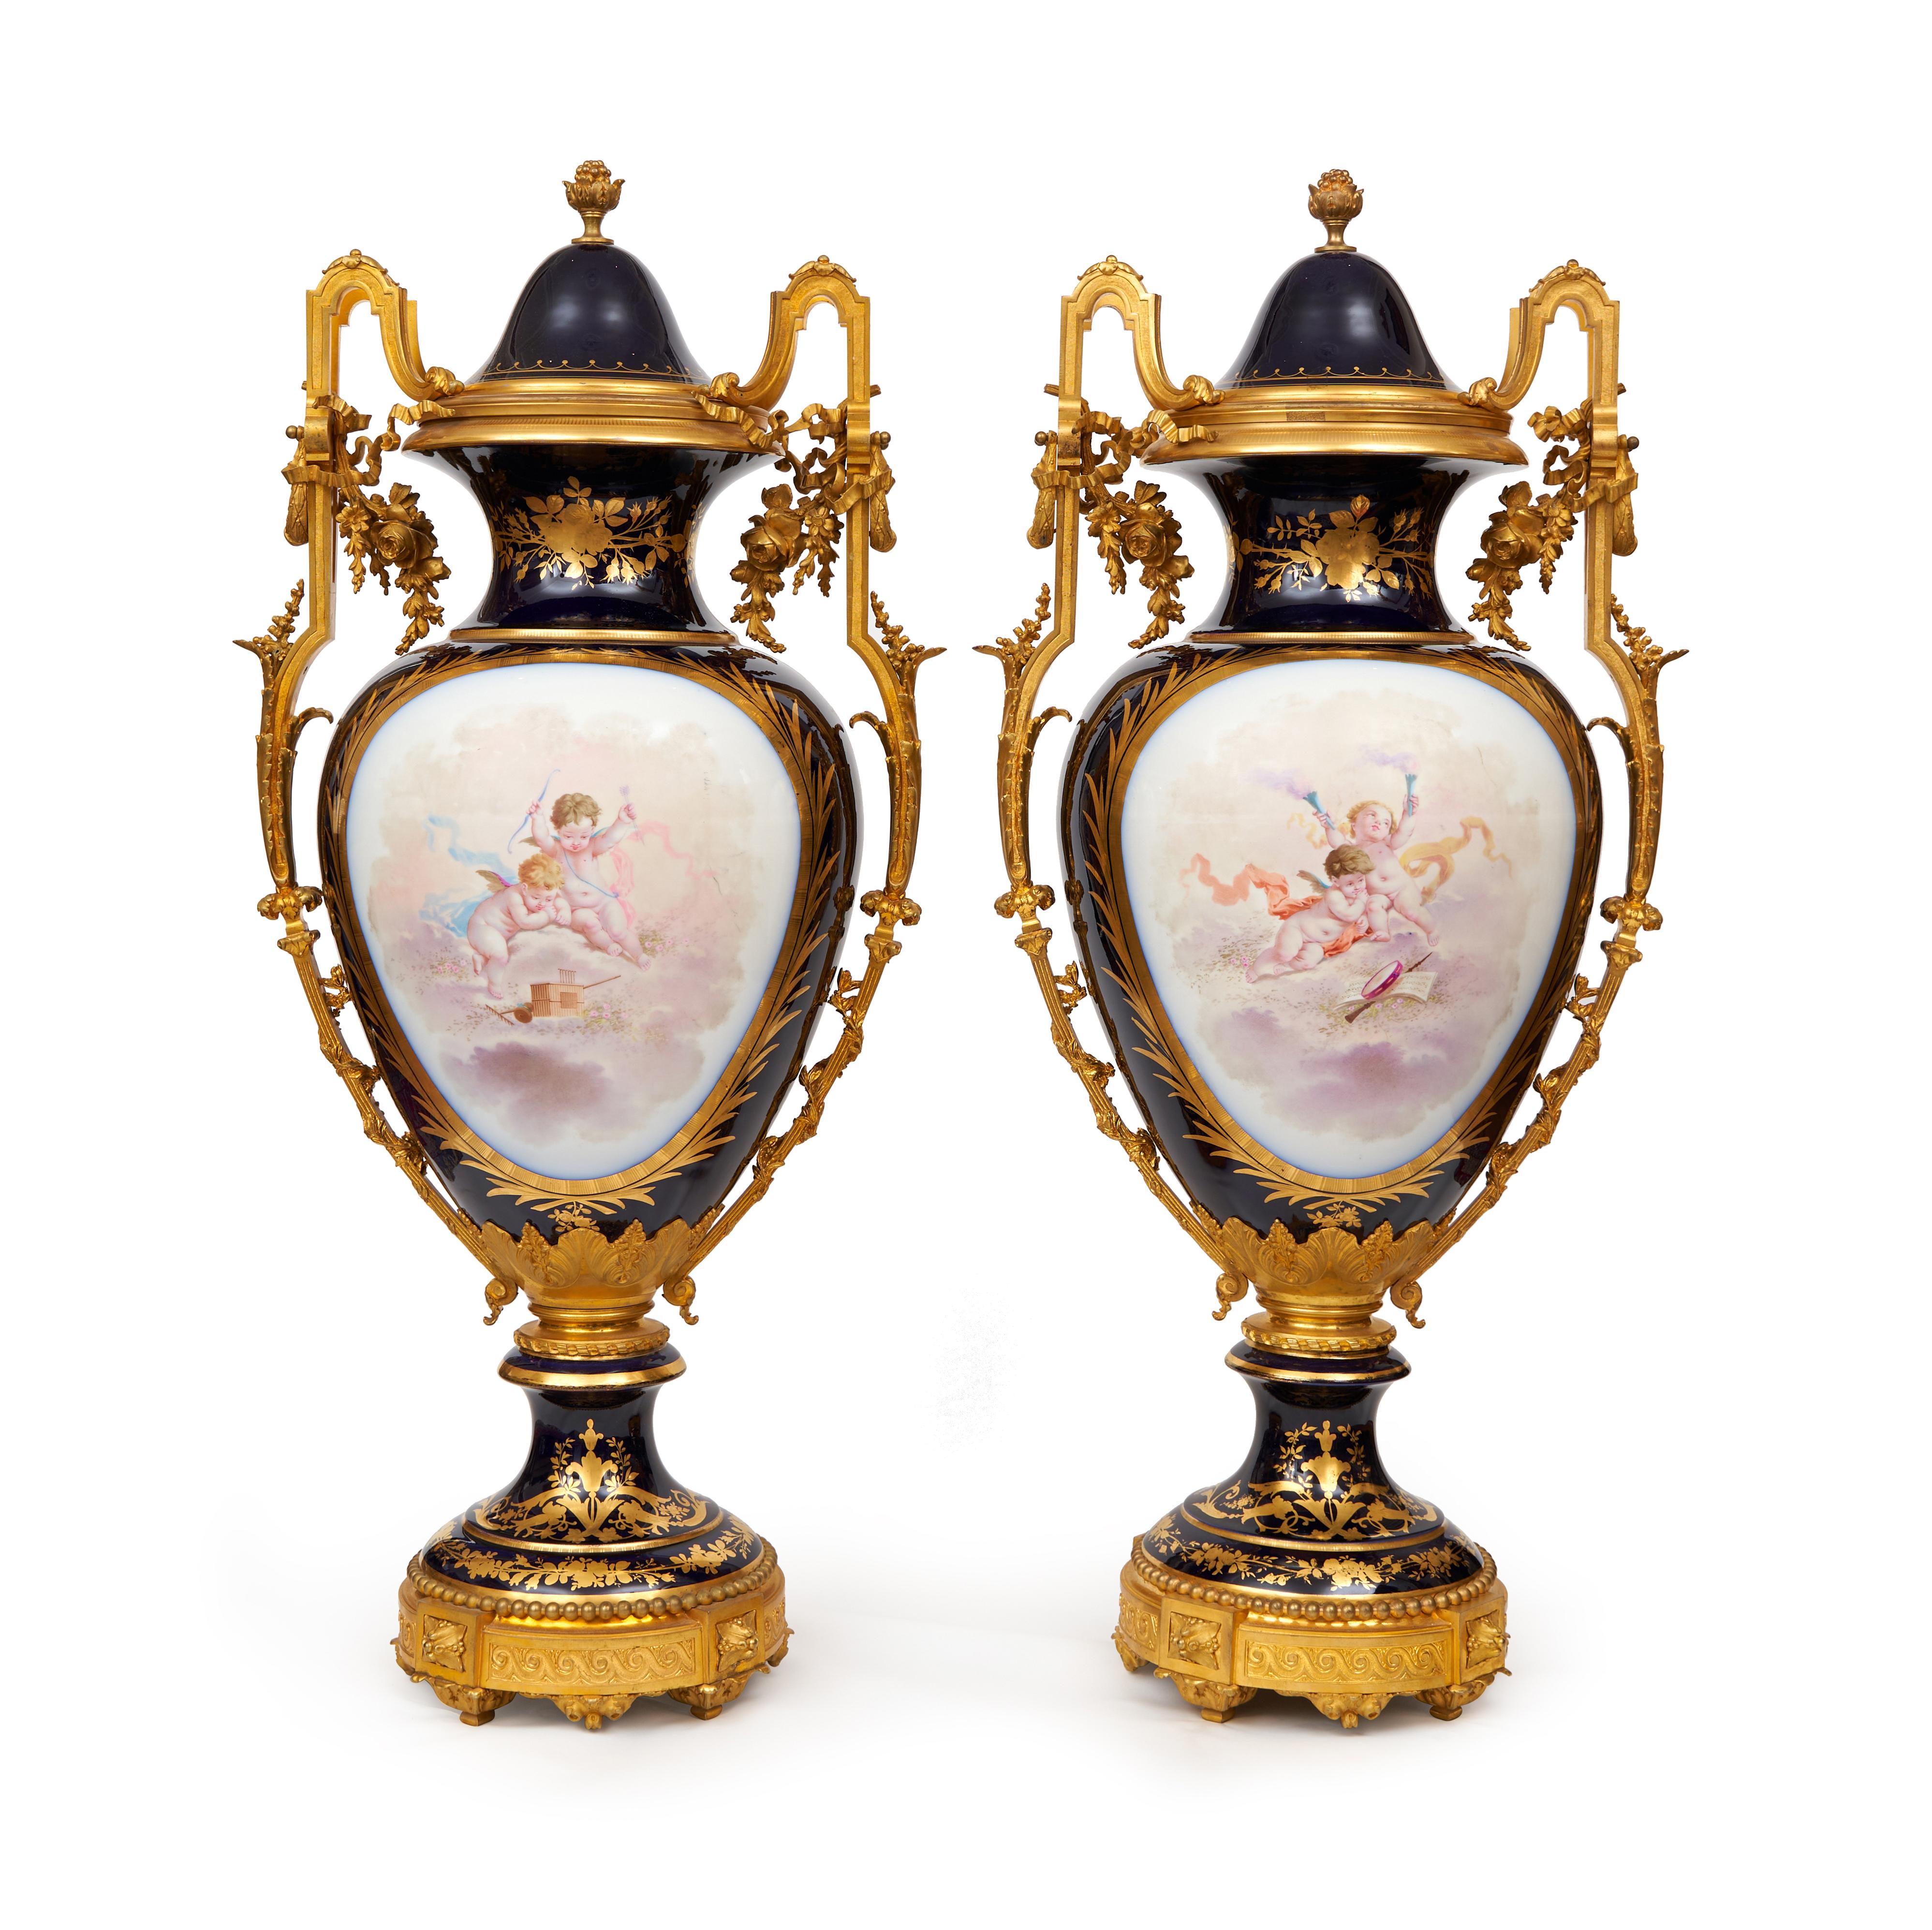 French A Monumental Pair Of Late 19th/Early 20th Century Sevres Style Porcelain And Orm For Sale